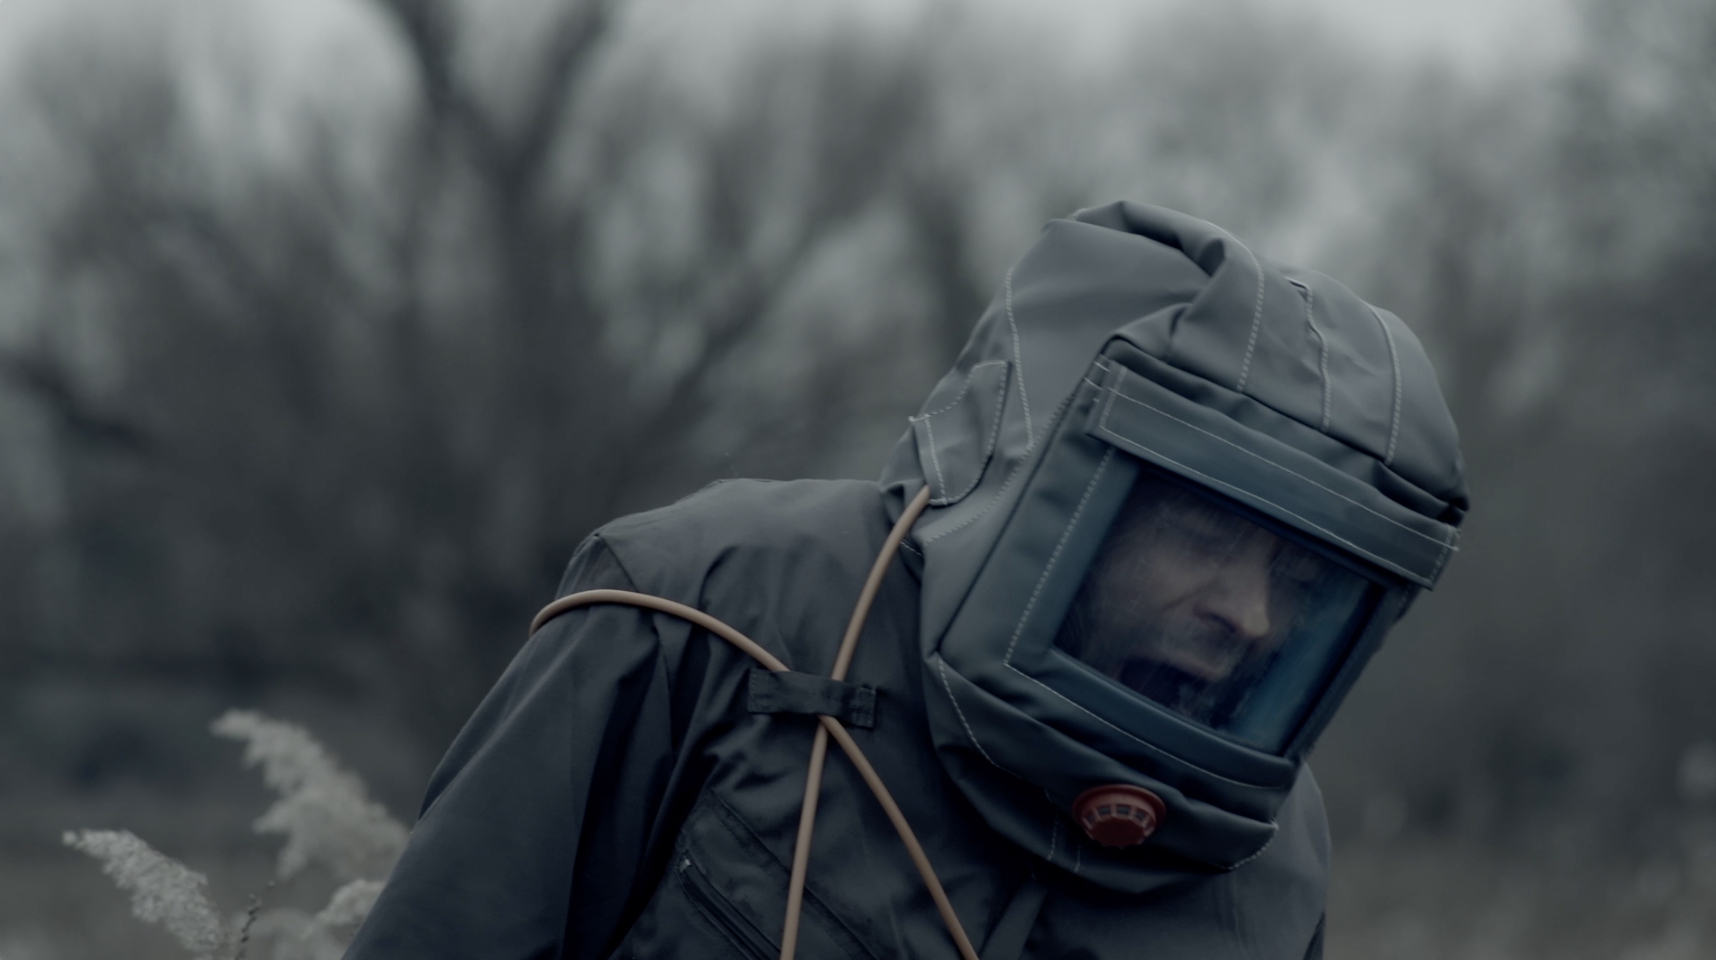 Image link to video clips from 'Alive' by Thomas Briggs, 'The Fall' by Kitty Barnes & 'Our Self' by Lauren Llewella. Image depicts a character in a protective suit